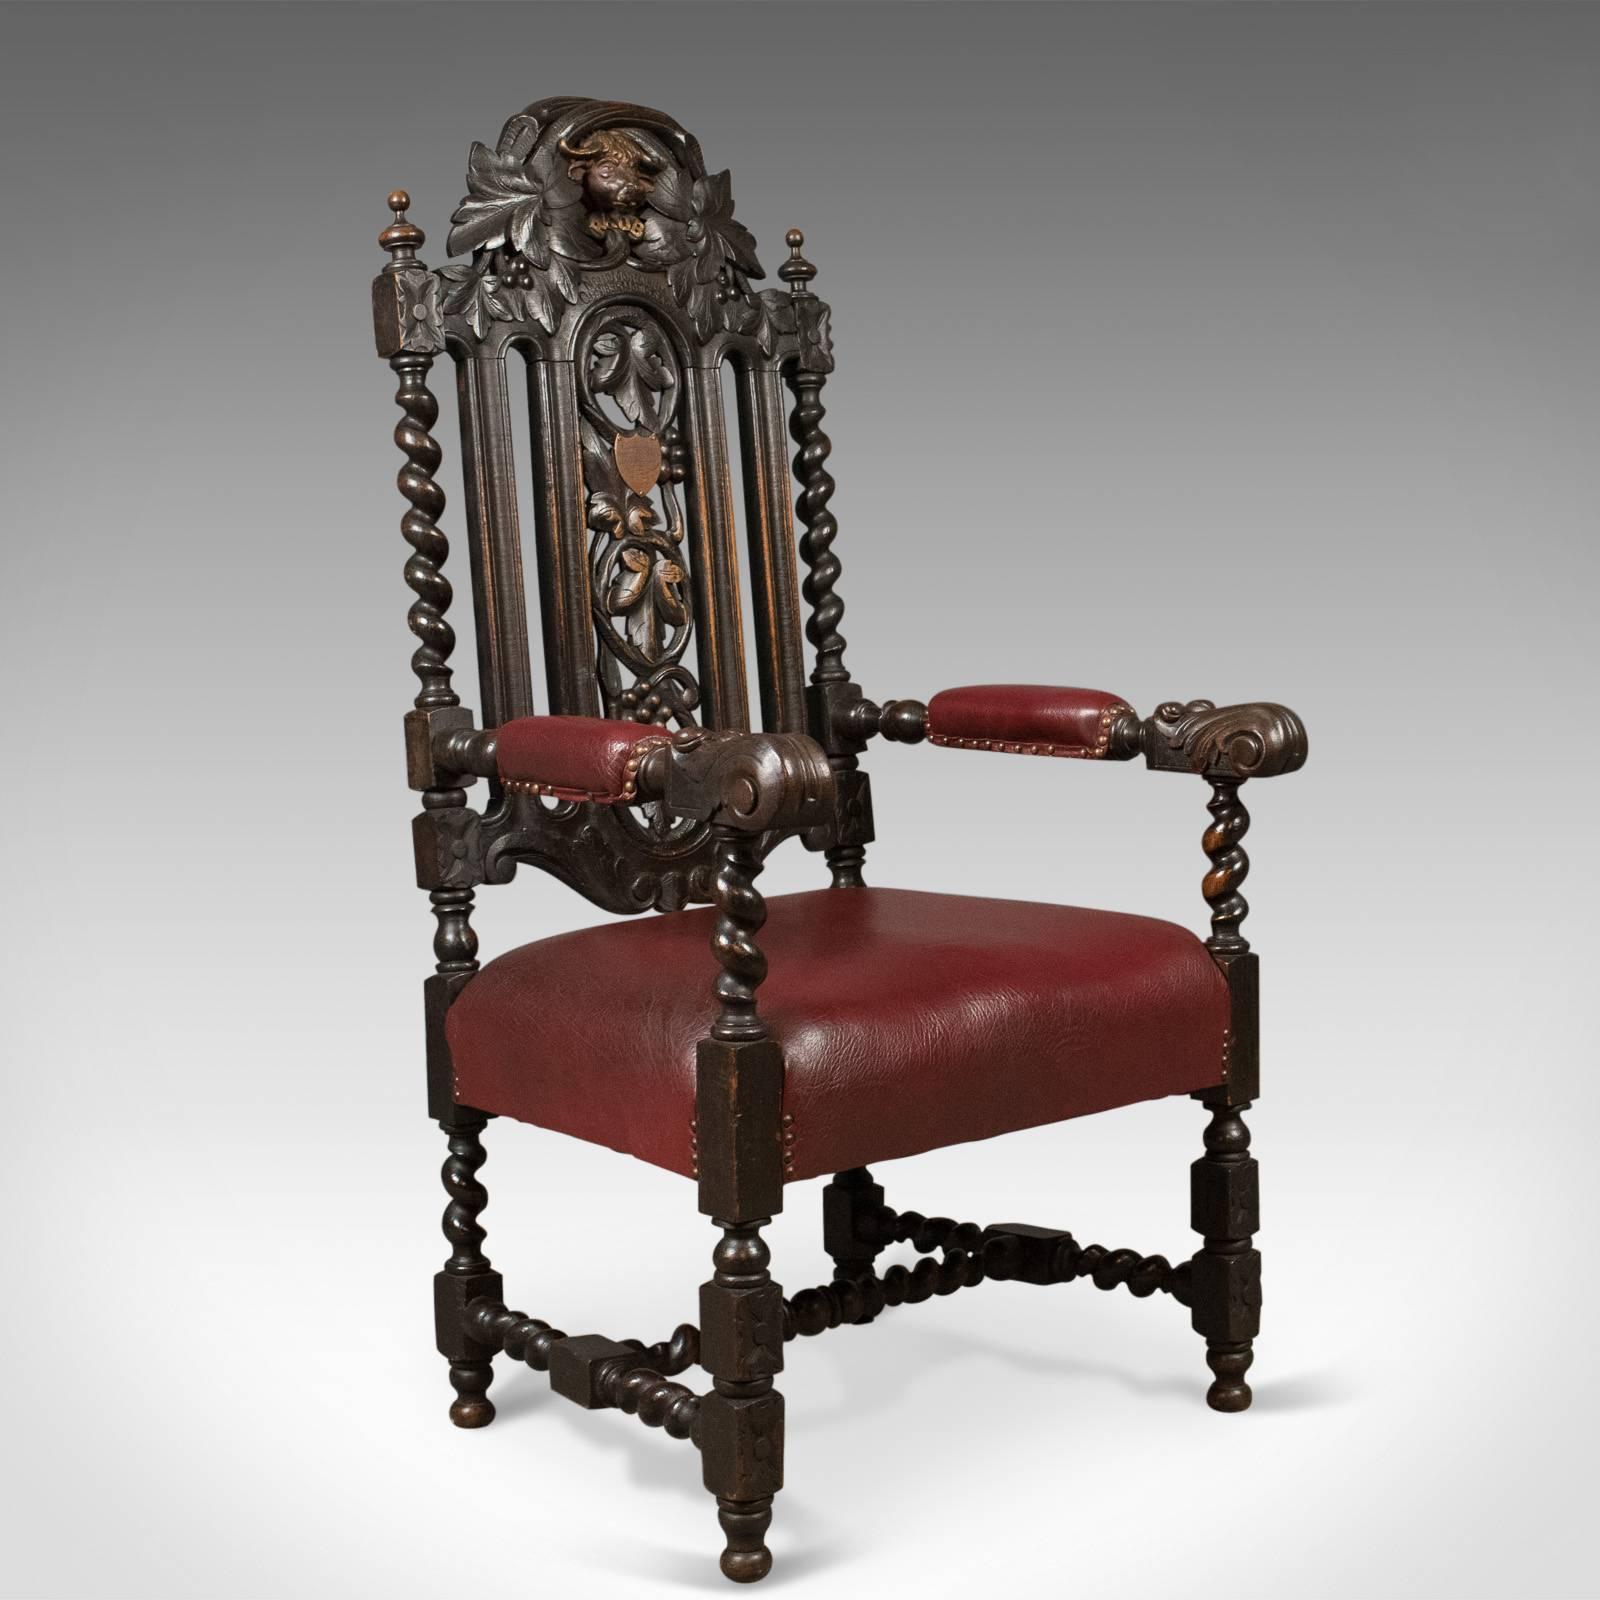 Great Britain (UK) Antique Lodge Chair, 1913